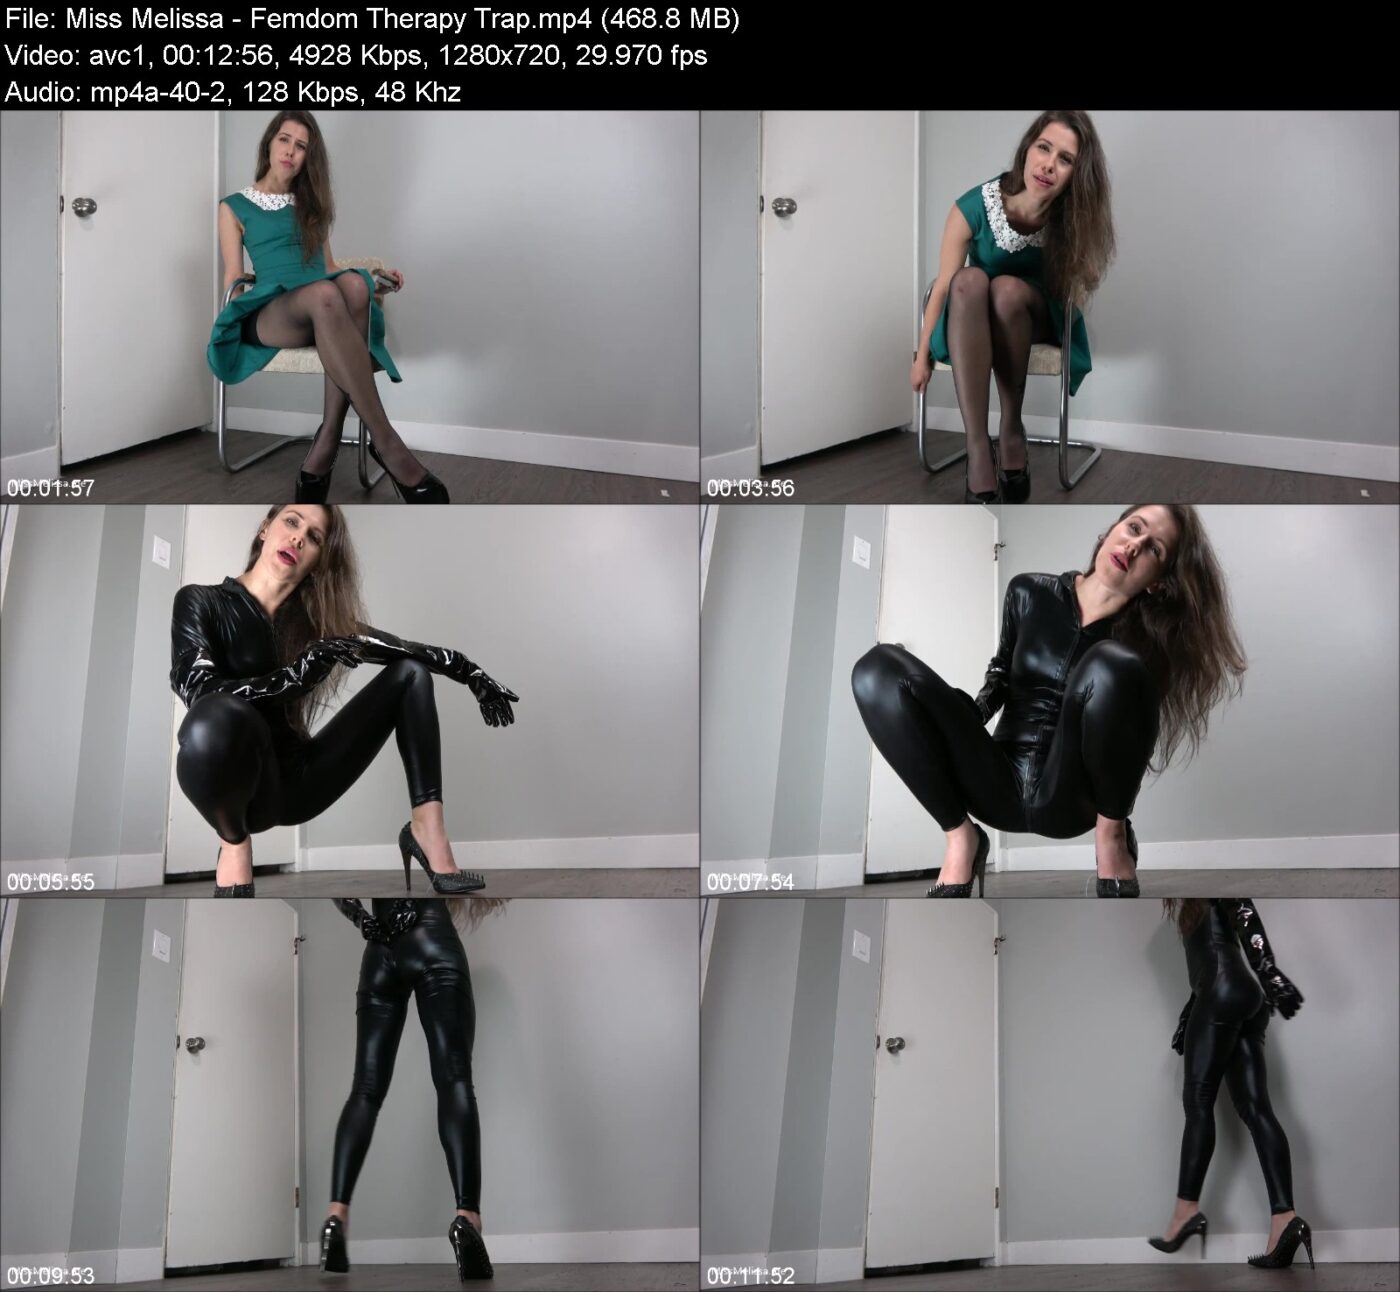 Miss Melissa - Femdom Therapy Trap